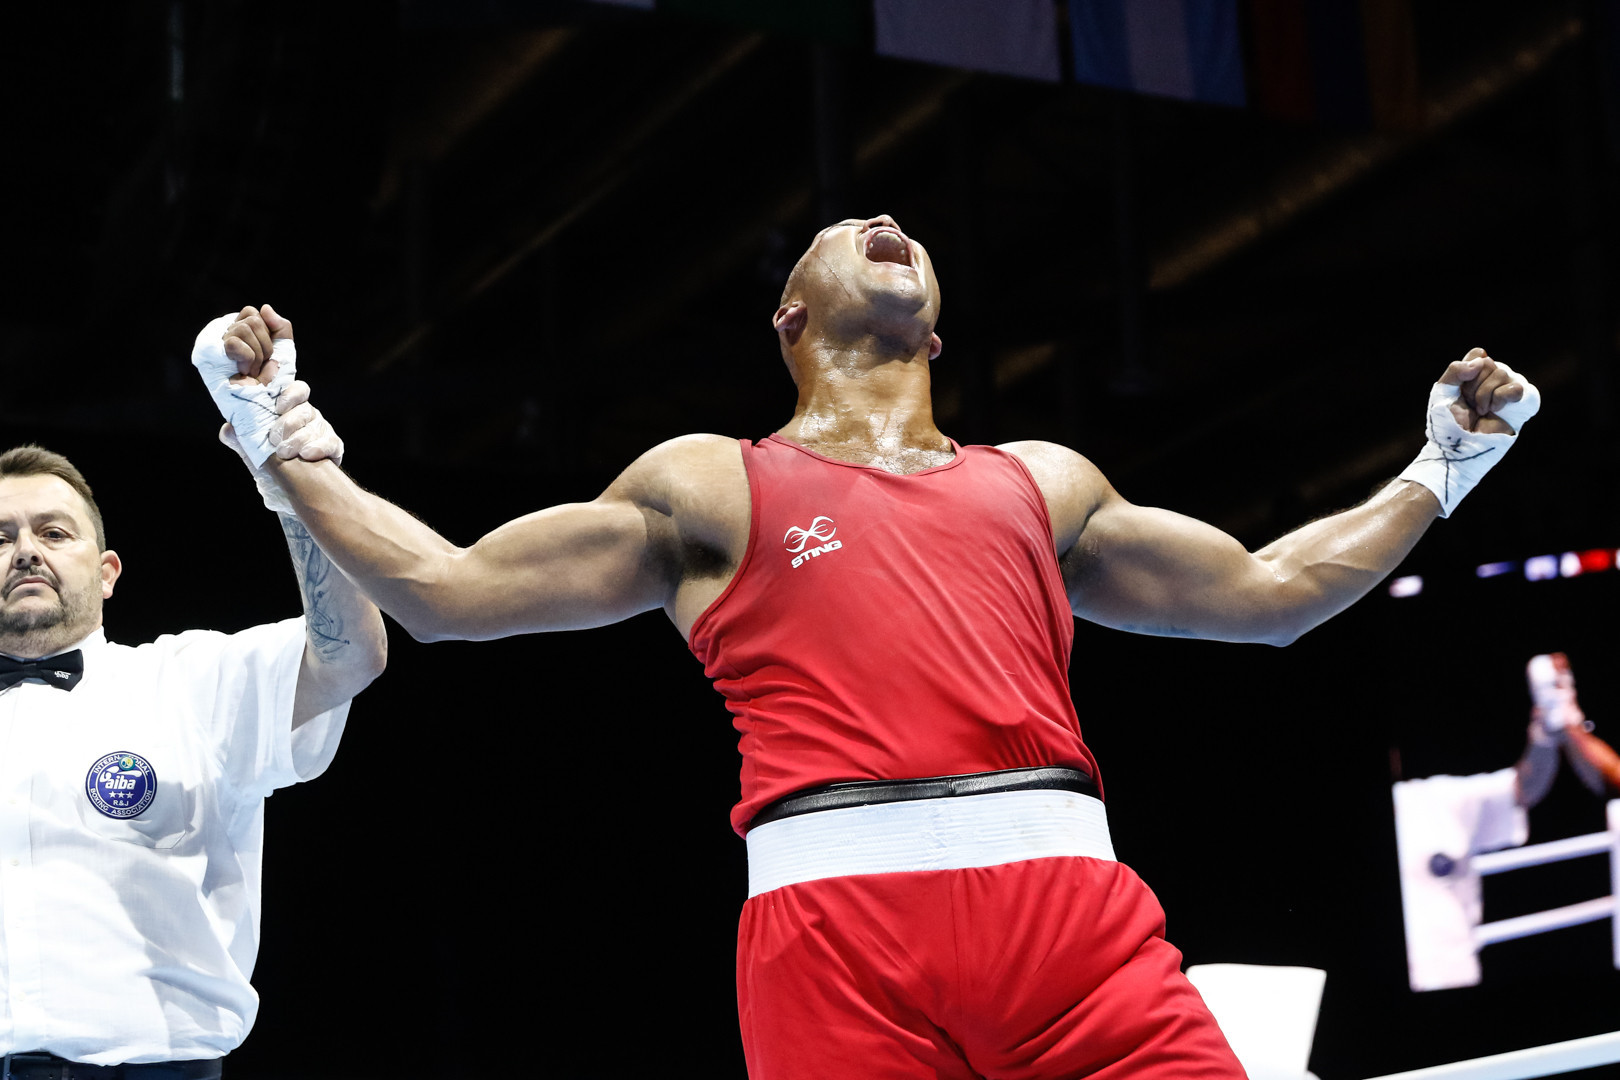 Commonwealth champion Clarke booed as he narrowly defeats home favourite Babanin at AIBA World Championships